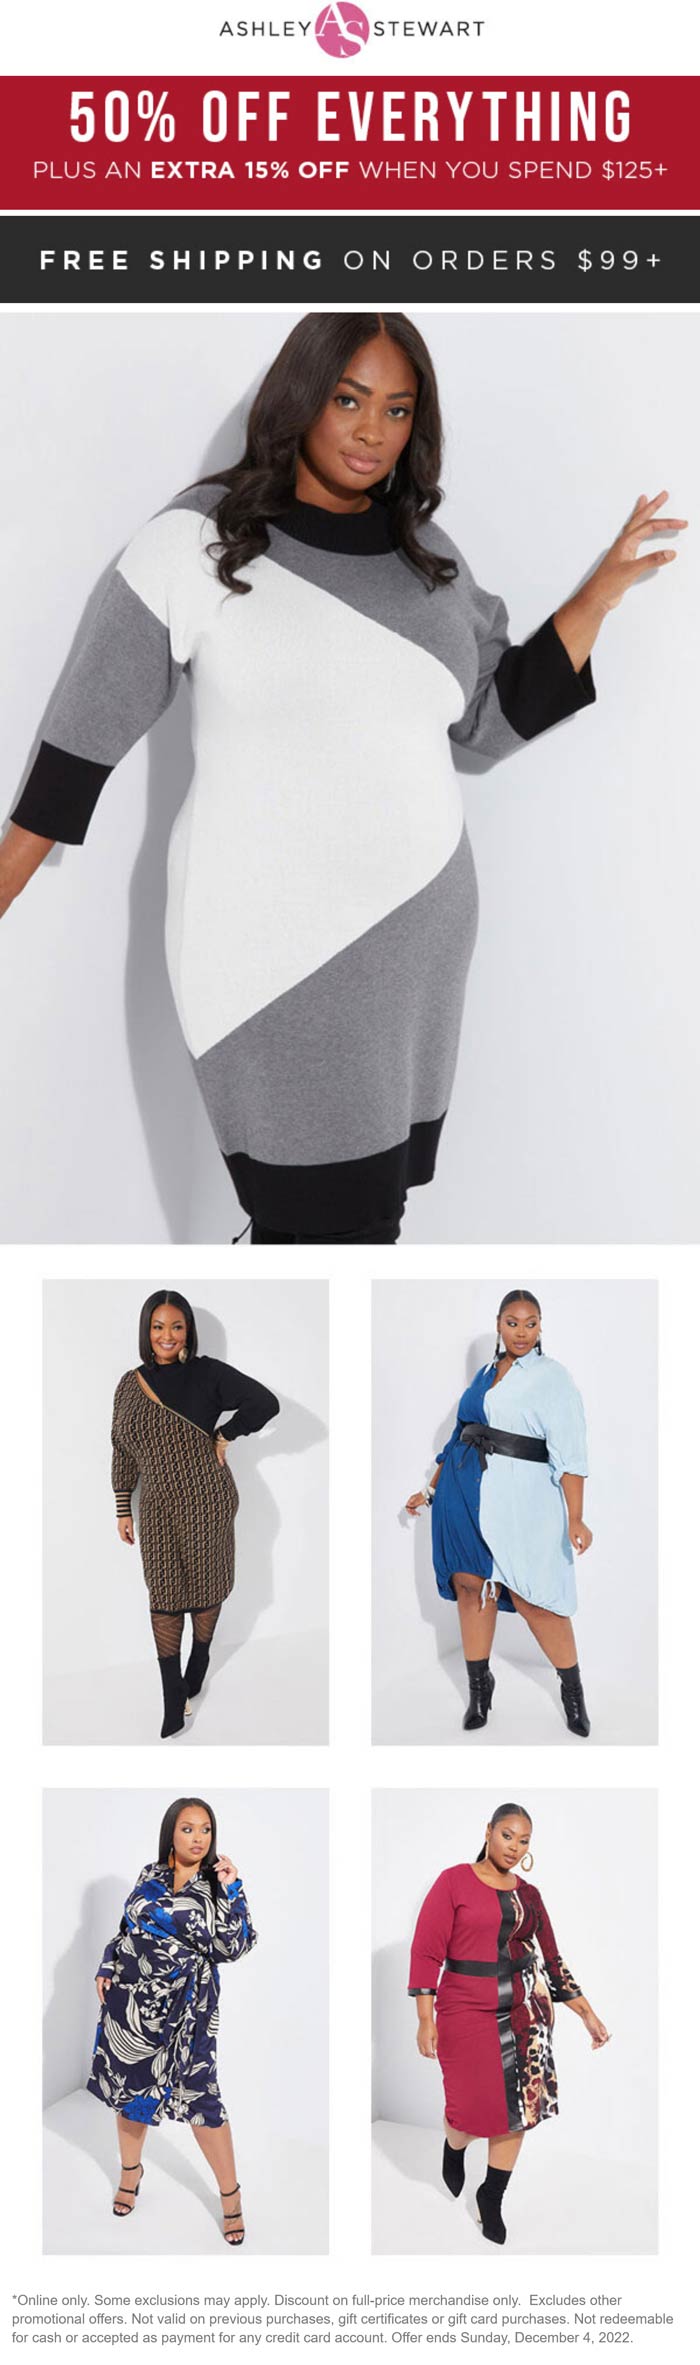 Ashley Stewart stores Coupon  50-65% off everything online today at Ashley Stewart #ashleystewart 